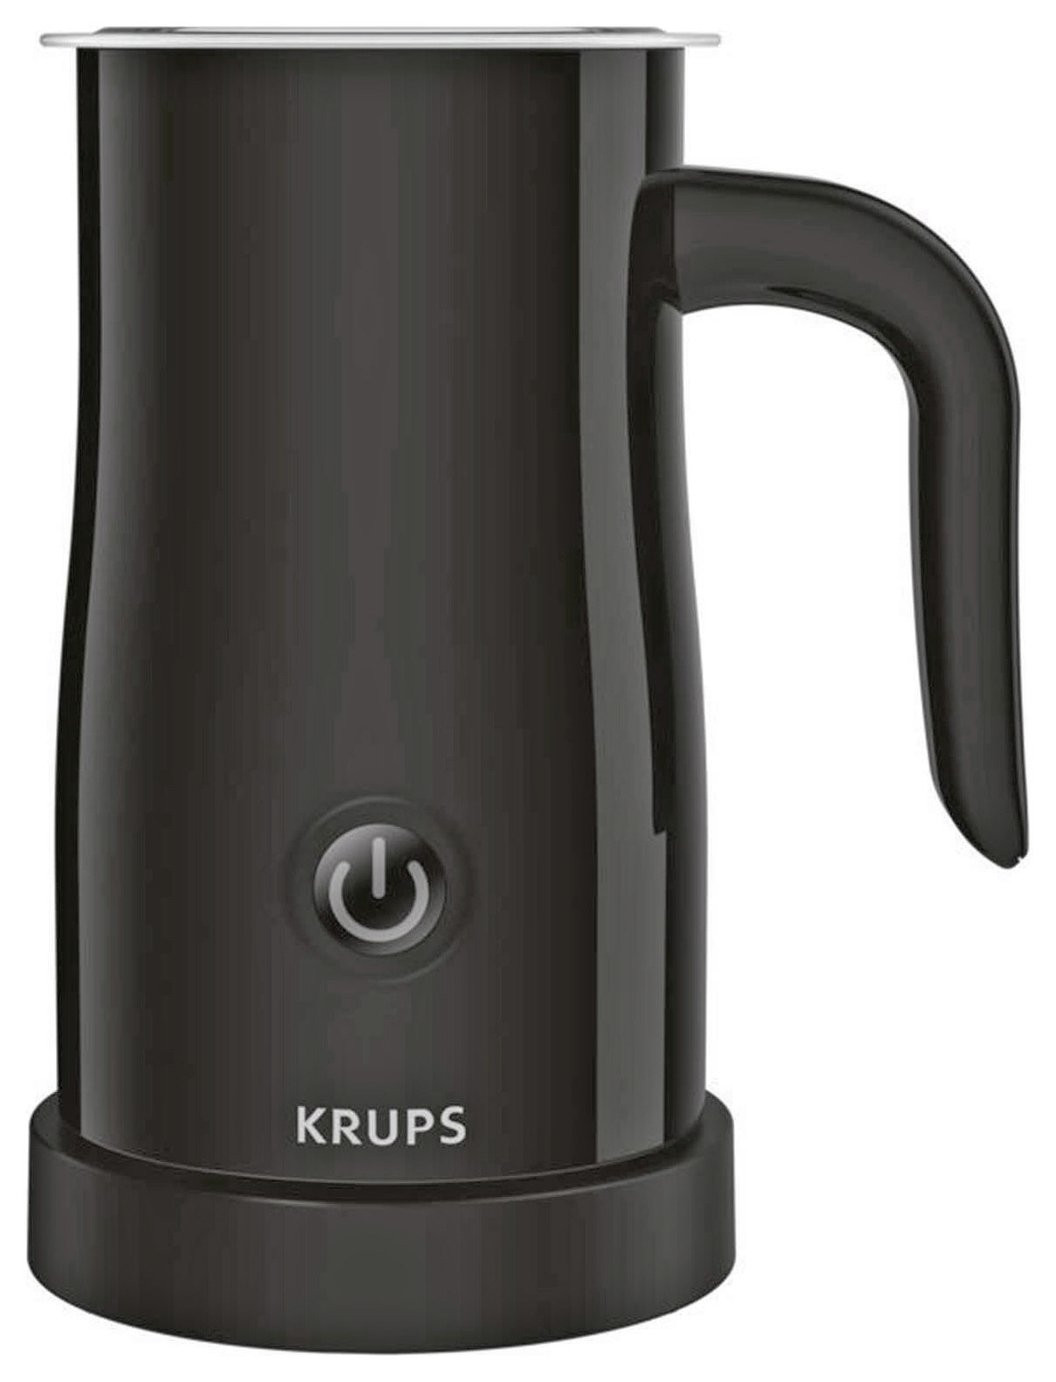 Krups Frothing Control Milk Frother